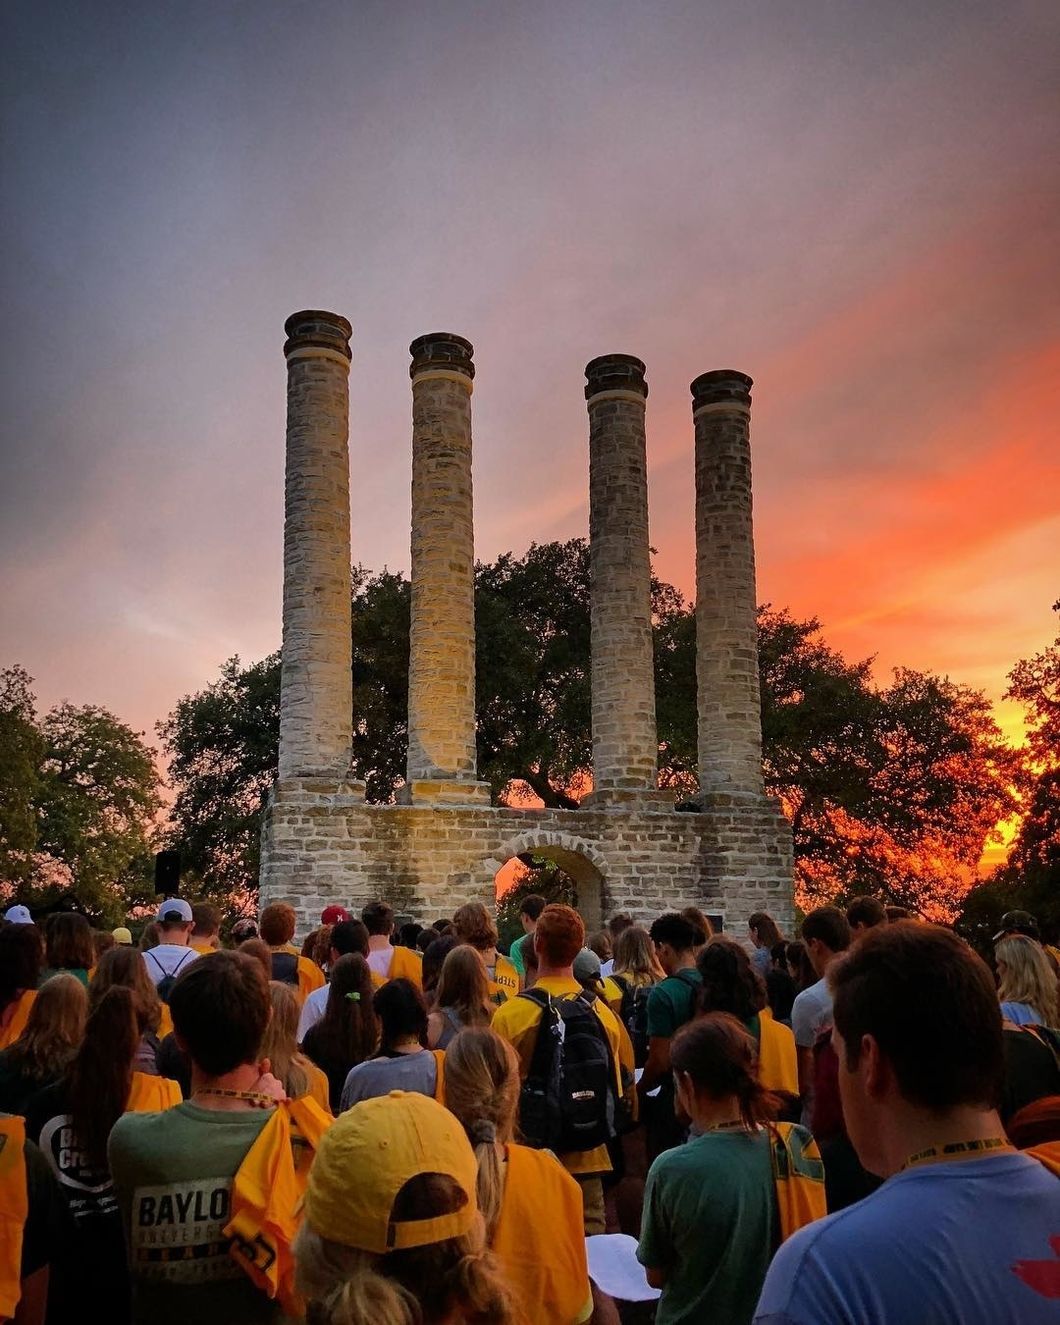 A Prayer For The Baylor Class Of 2022, As You Finally Move To Your New Home